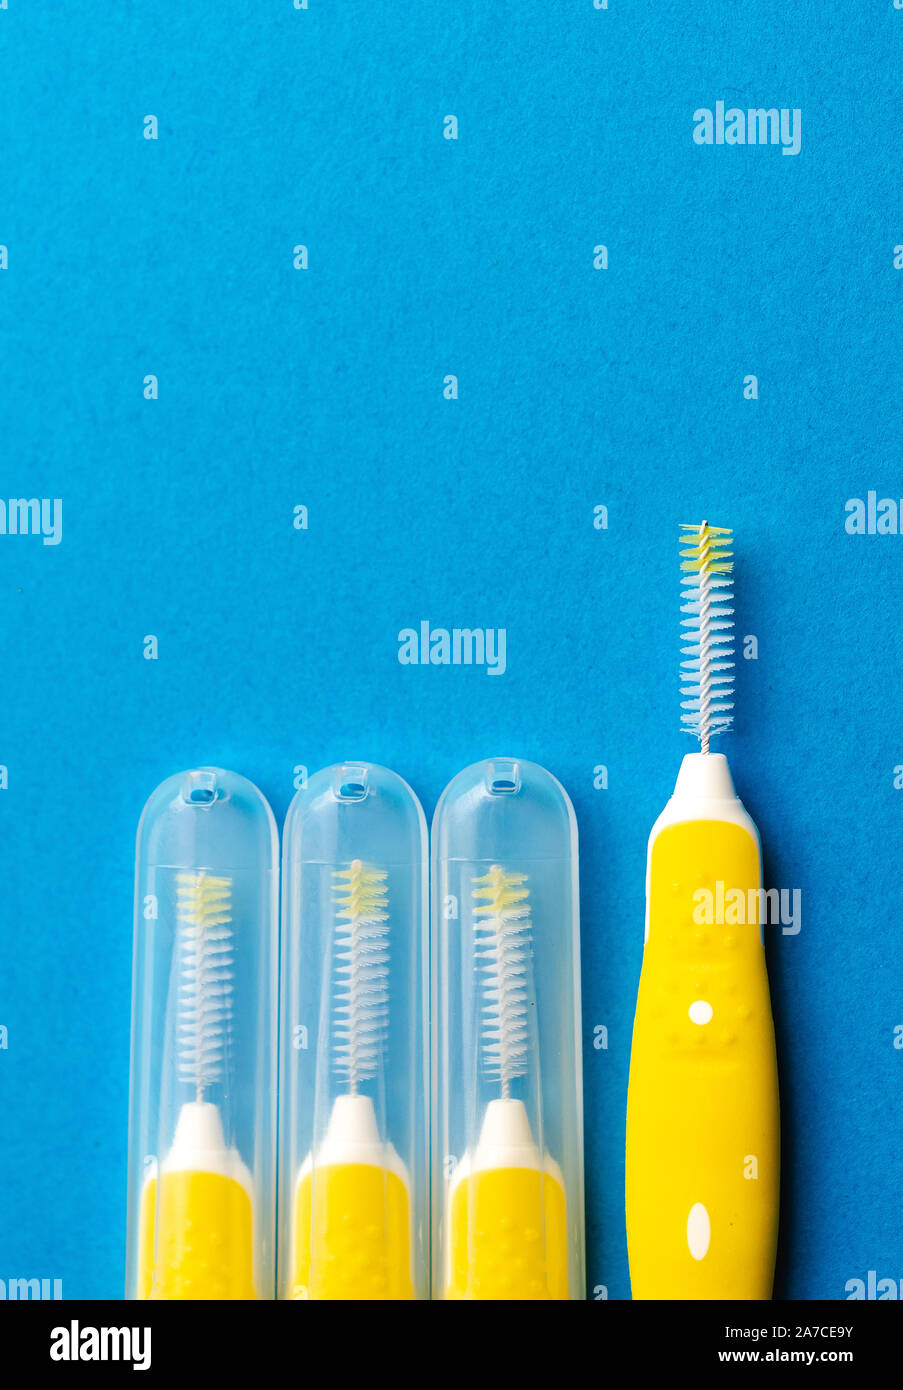 Interdental brush for interdental spaces over blue background. The concept of good mouth hygiene. Stock Photo